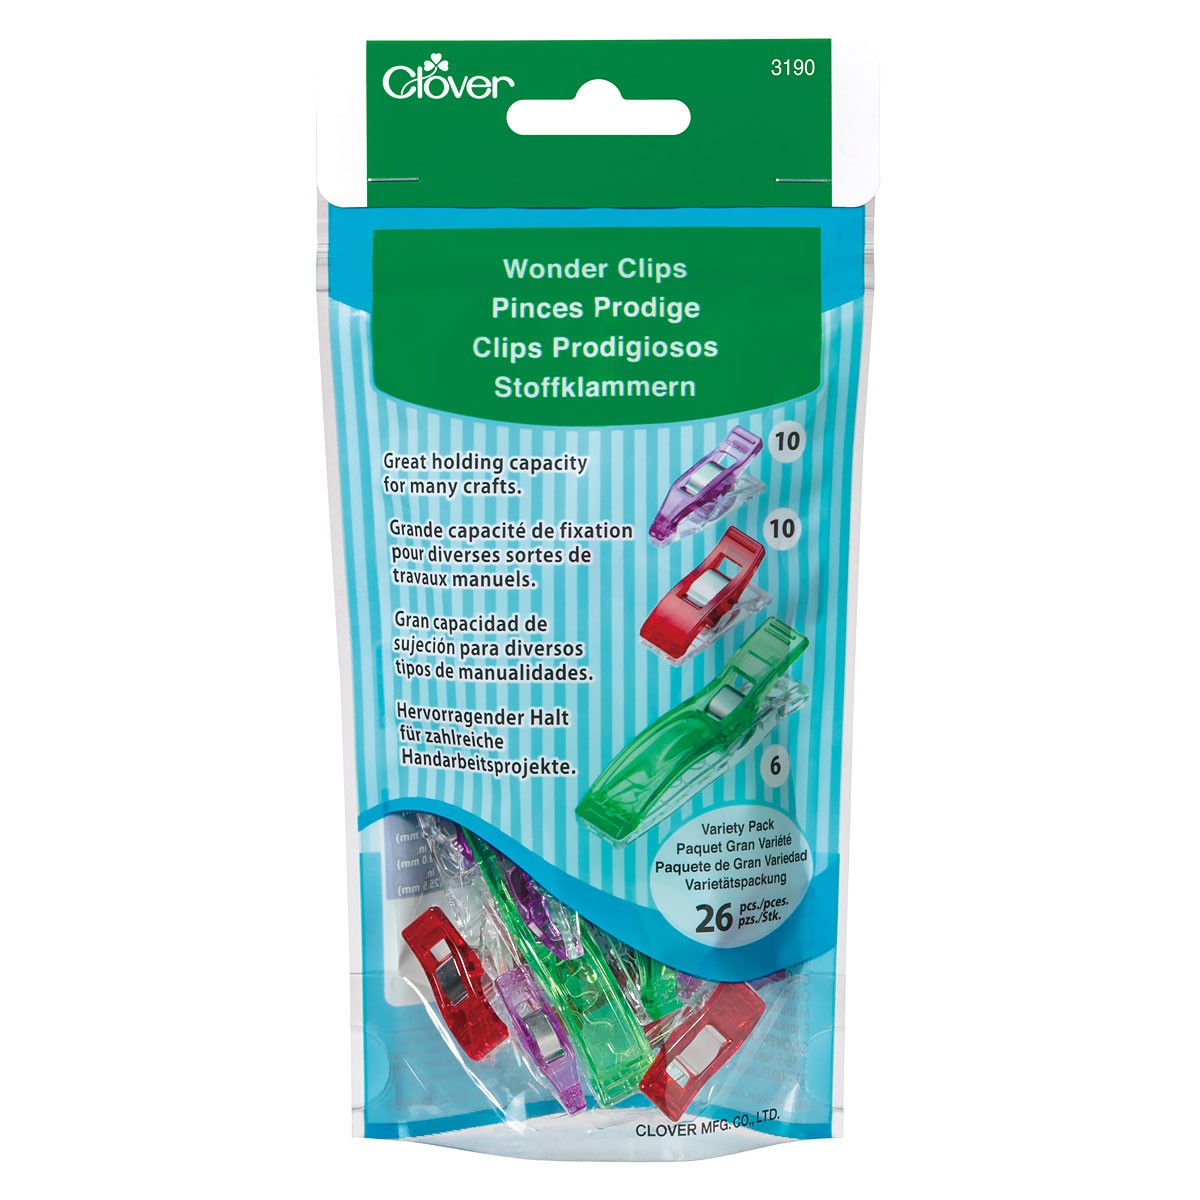 Wonder Clips from Clover - Handy Clips for Sewing, Quilting, & Crafting!